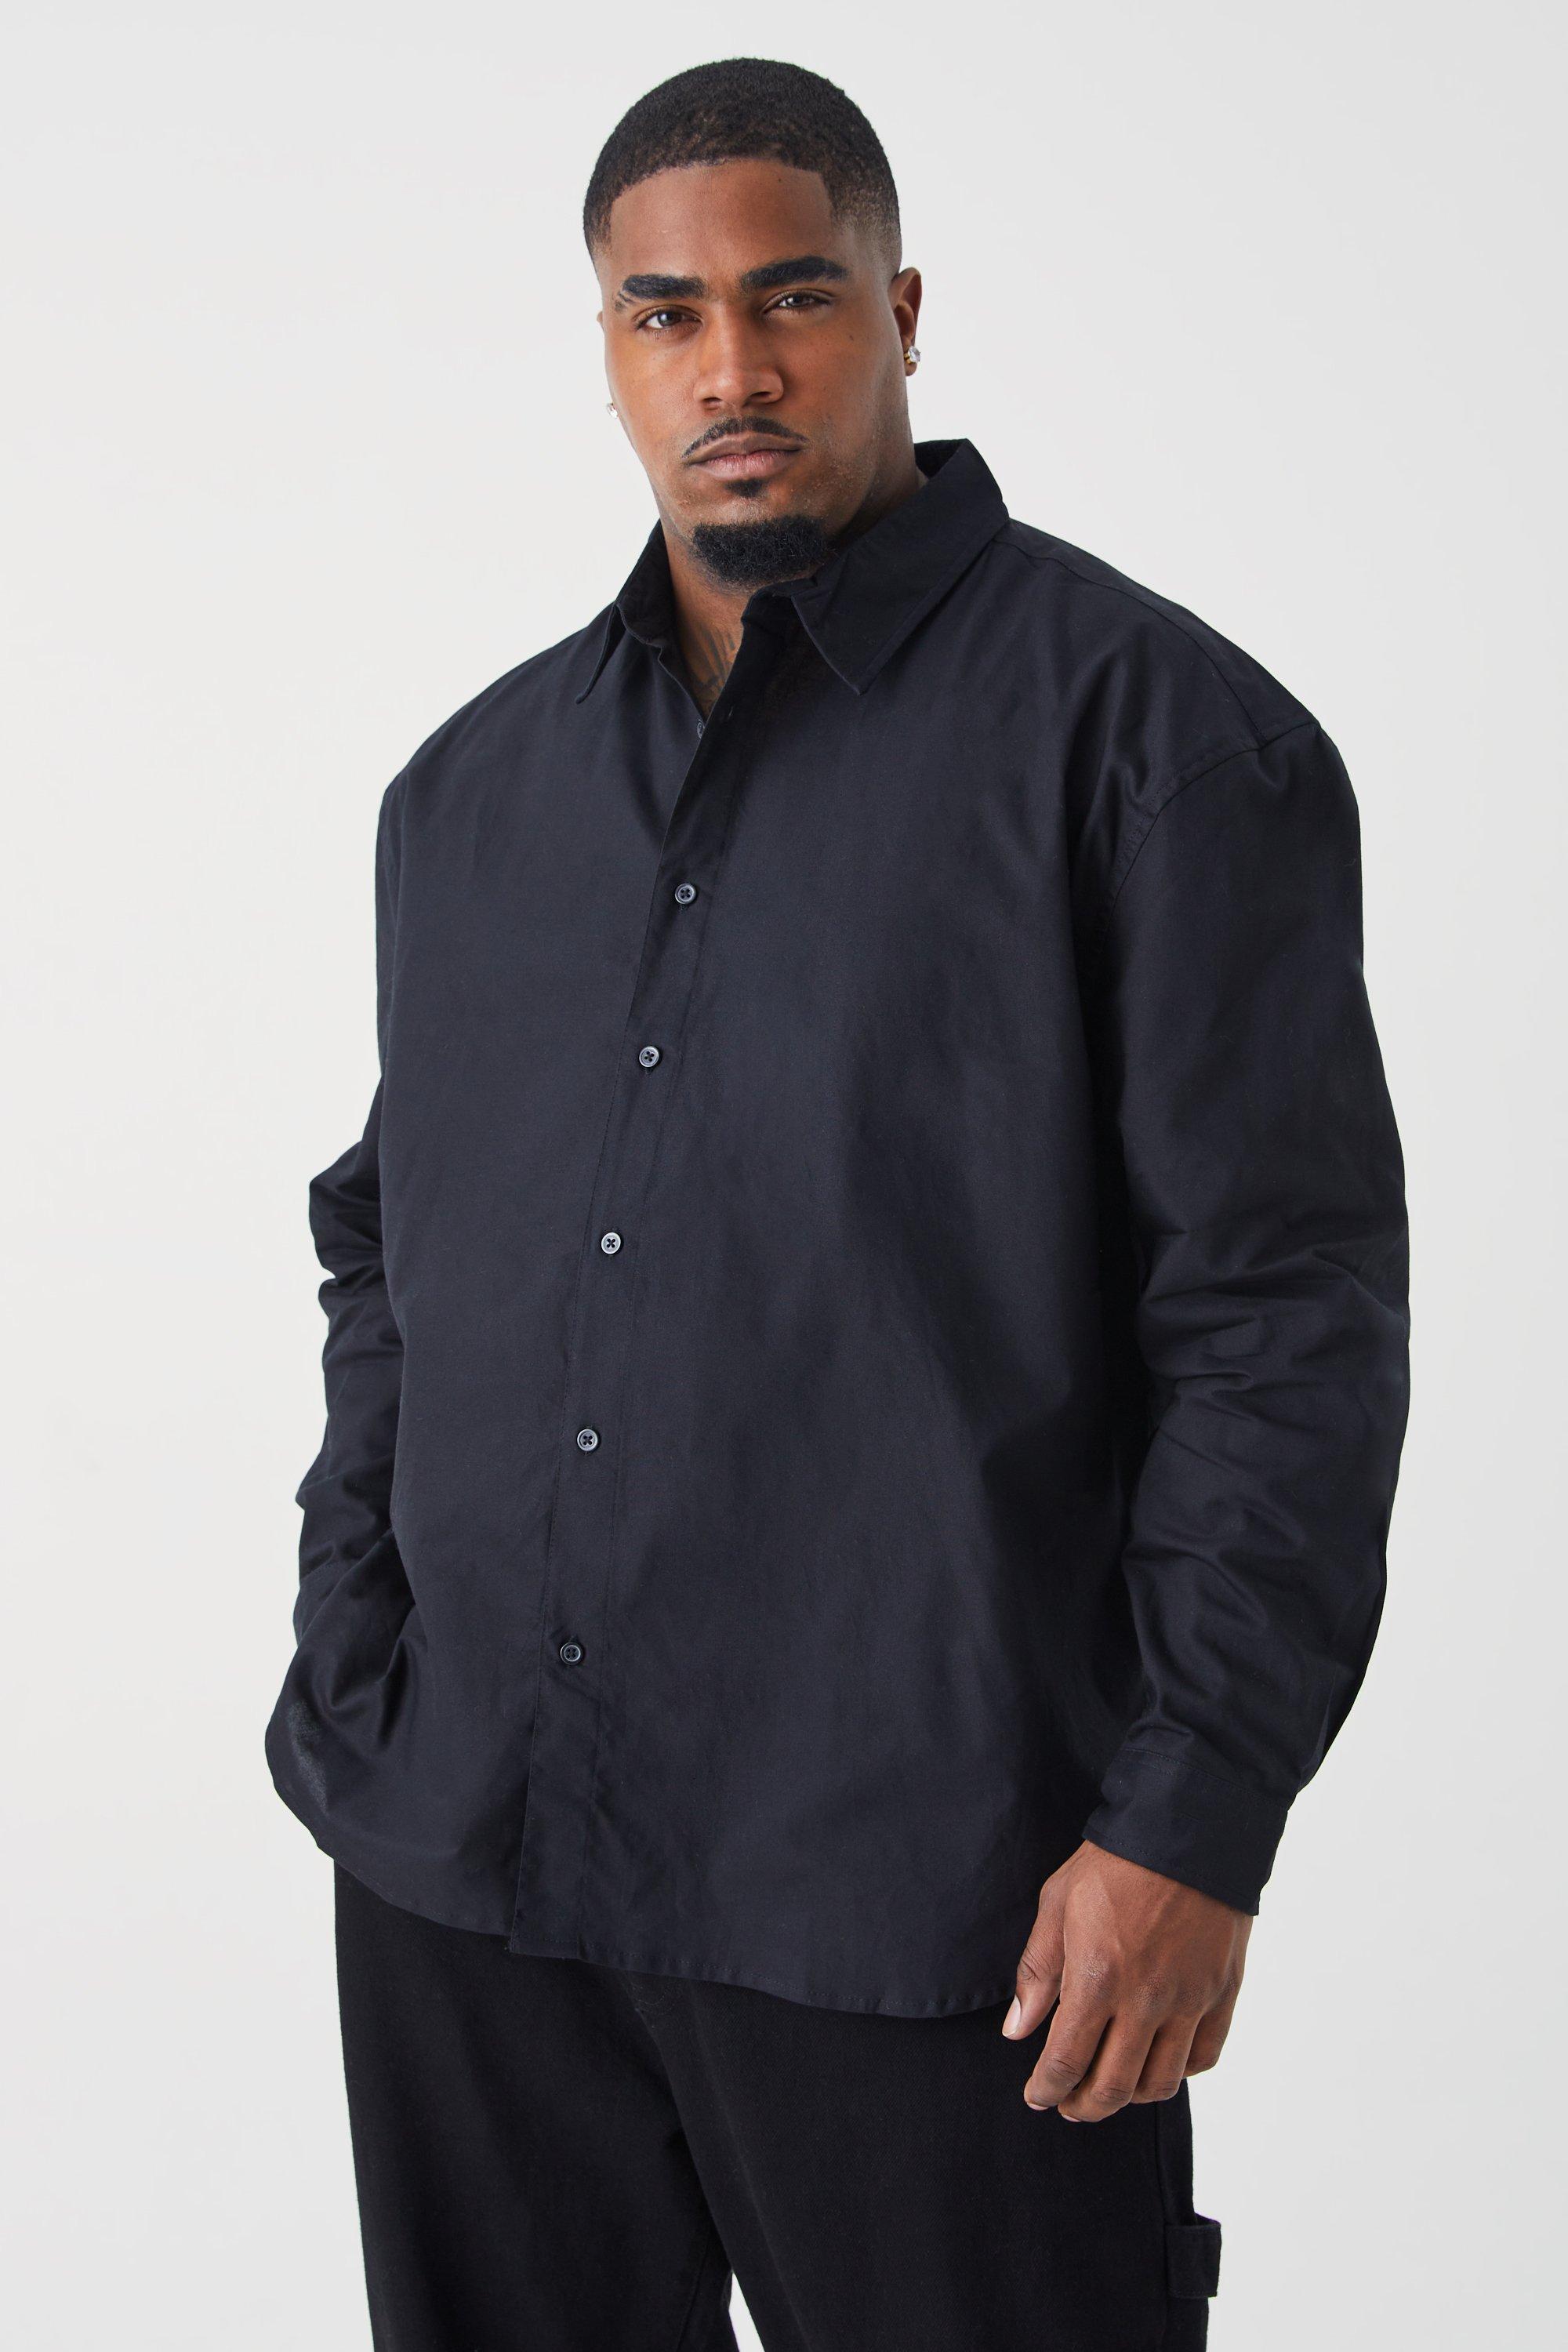 Mens Black Plus Size Relaxed Fit Long Sleeve Oxford Shirt, Black